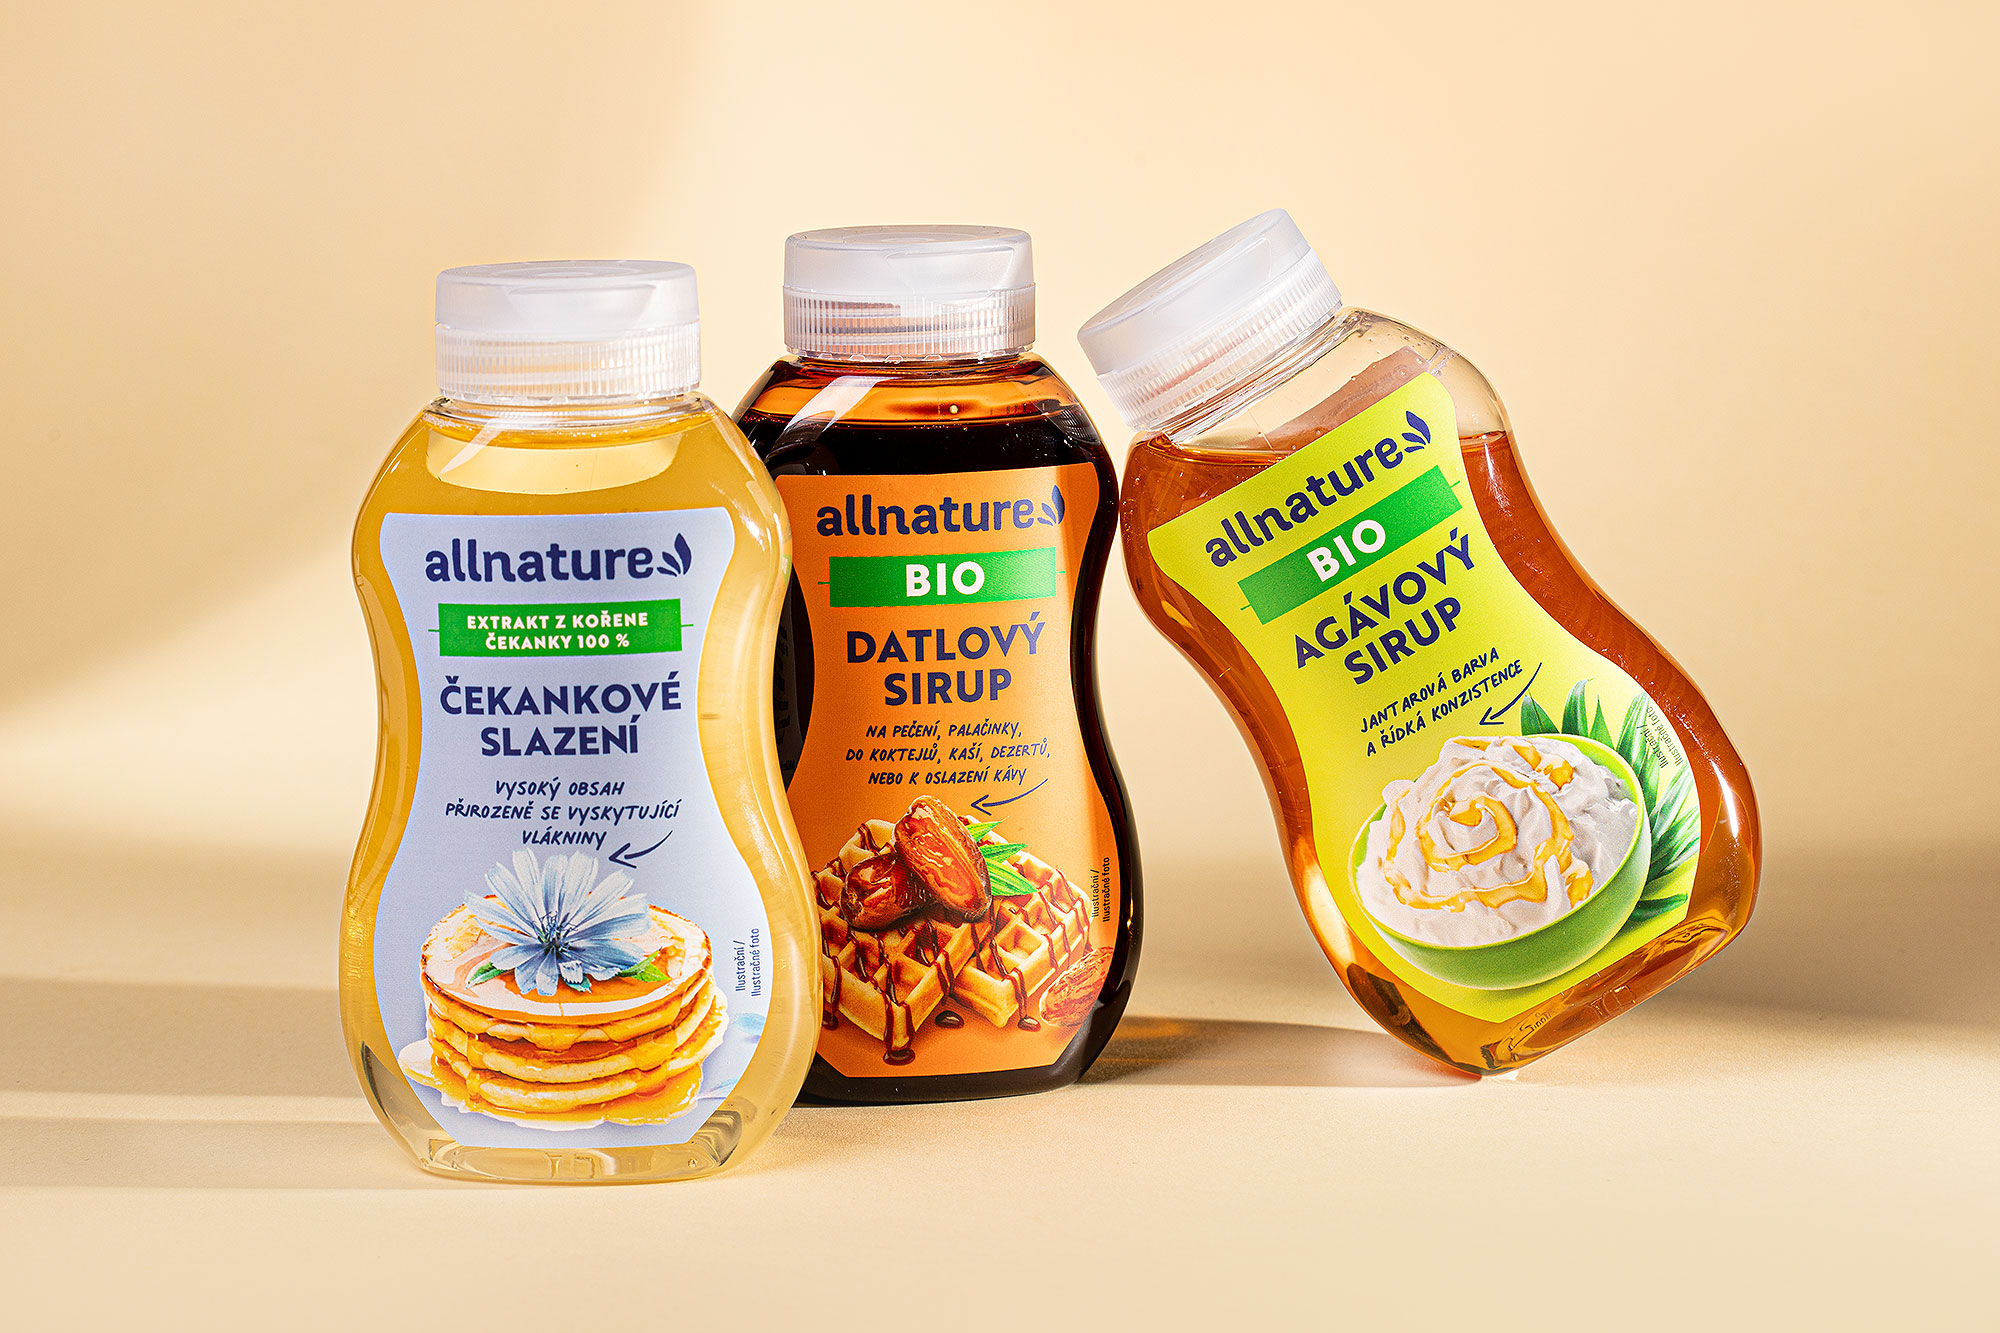 alllnature packaging syrup